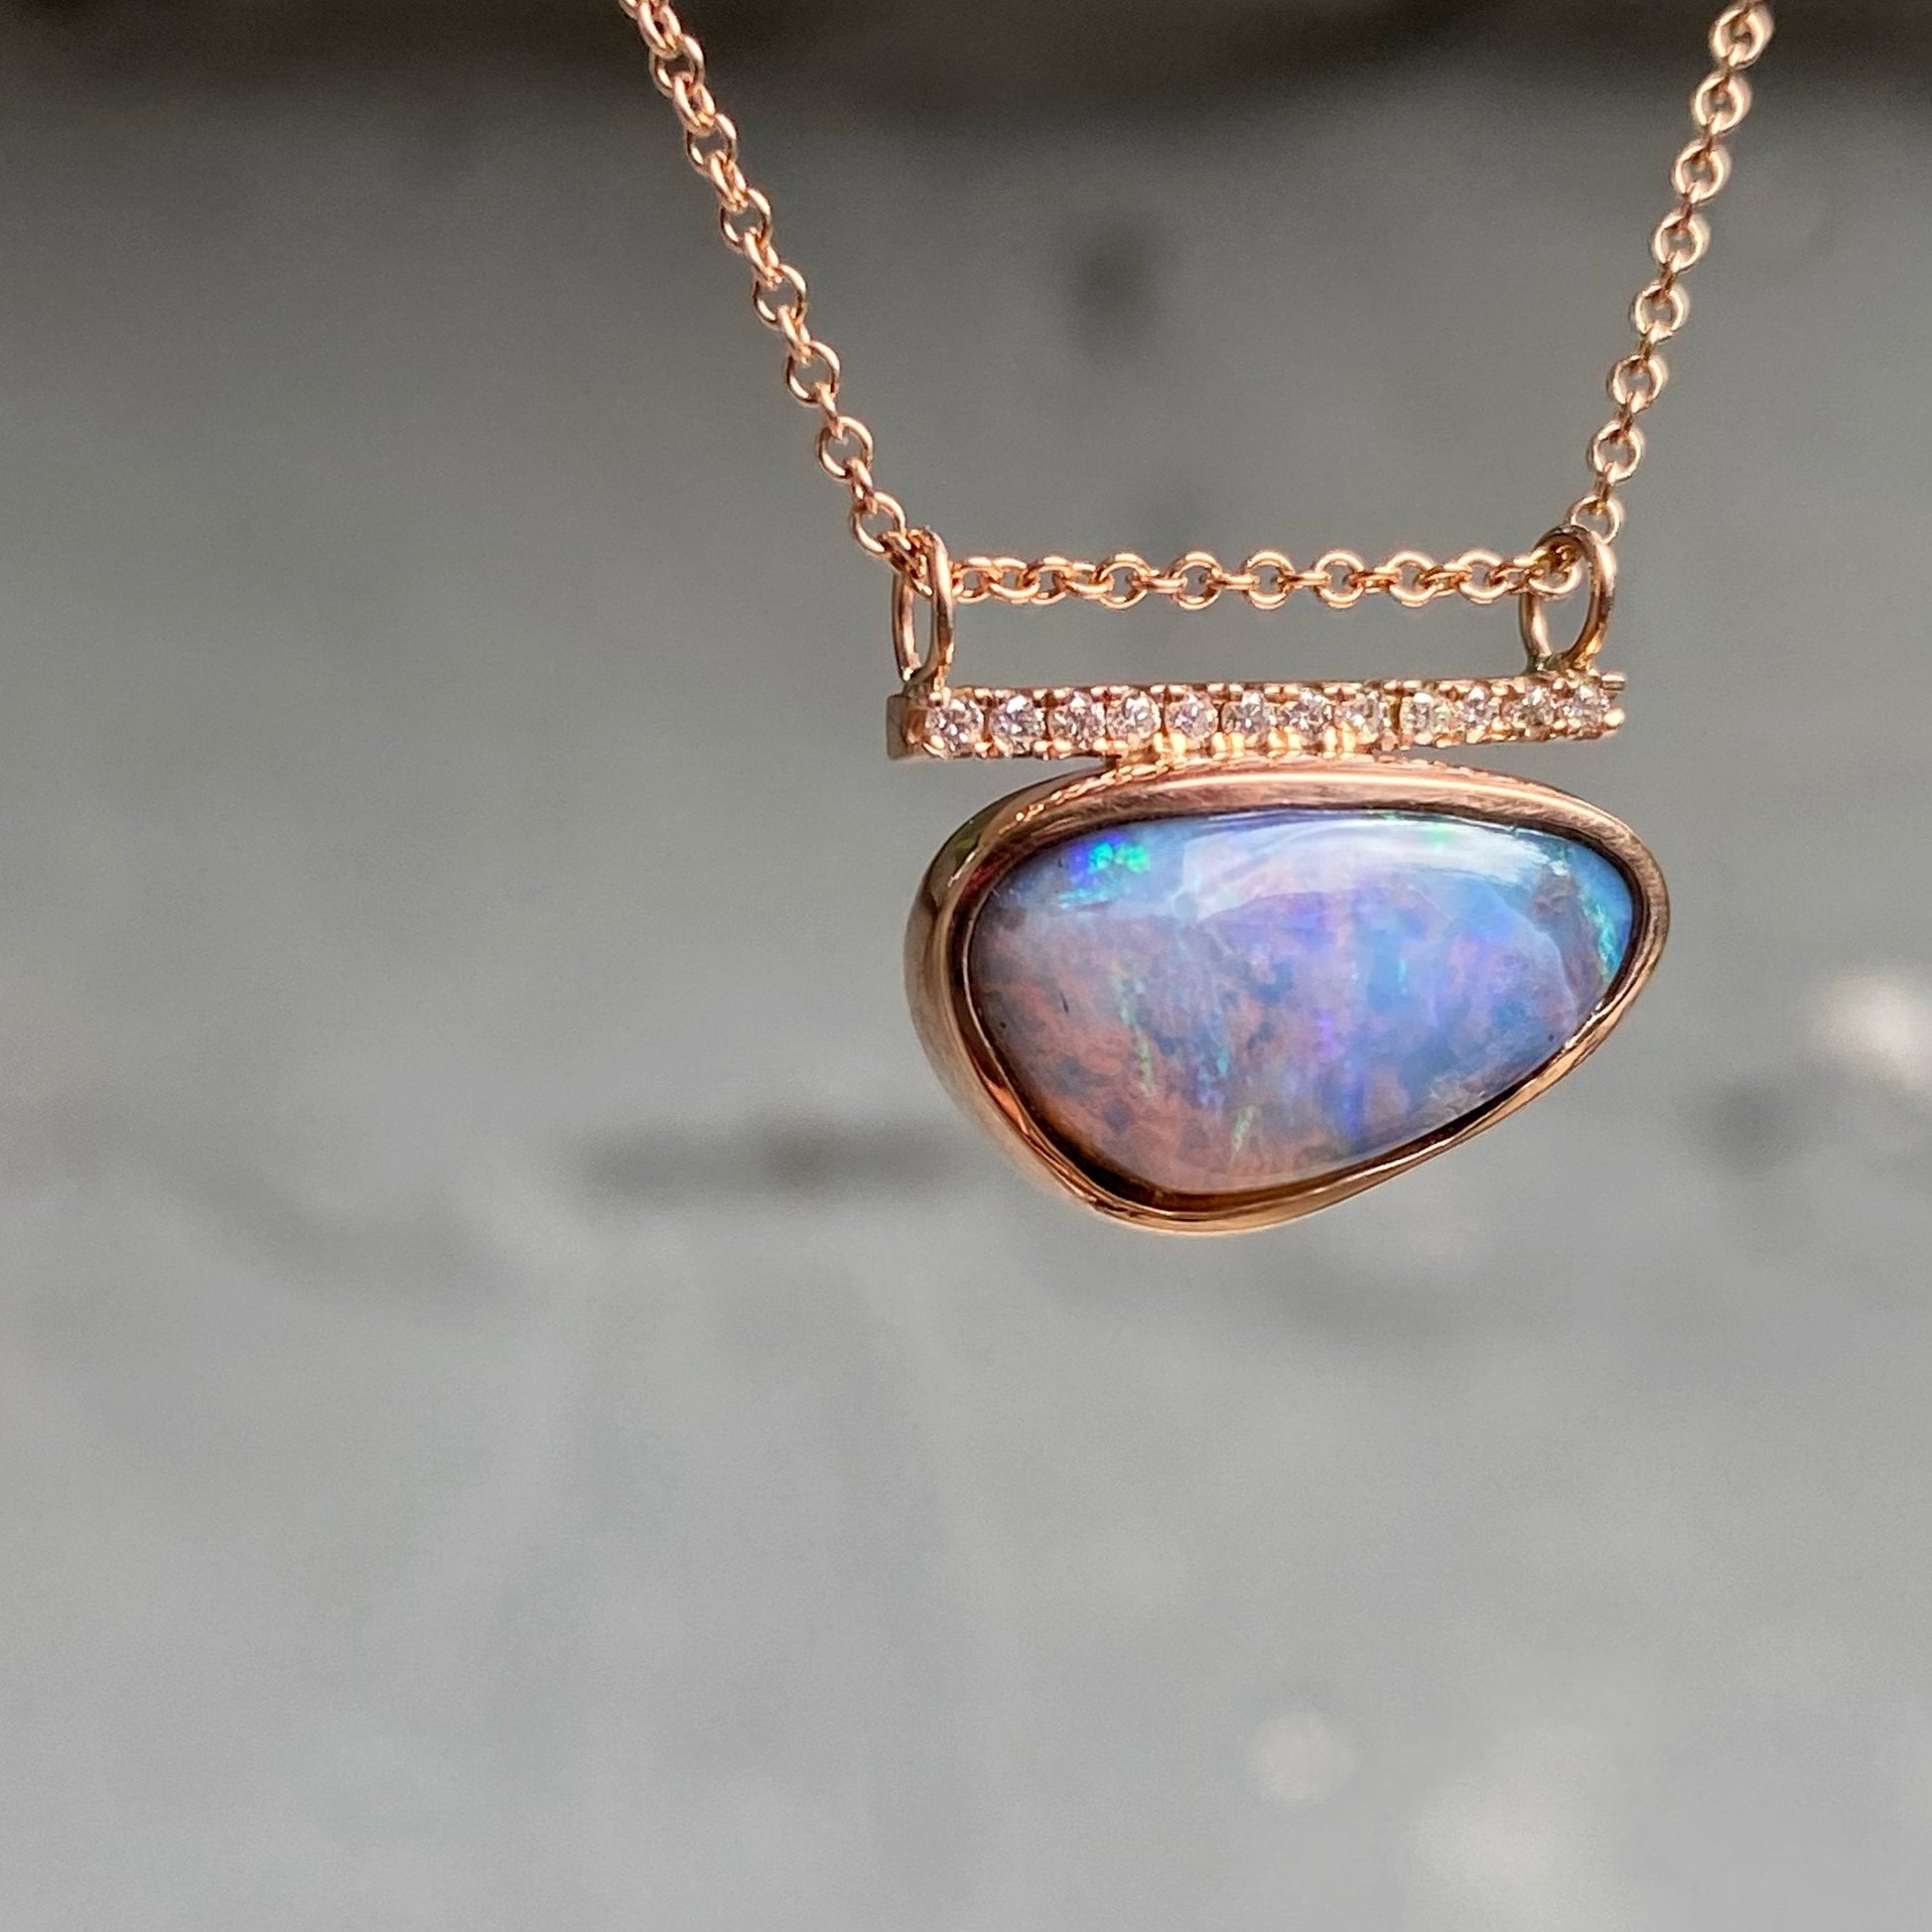 Opal necklace in 14k rose gold by NIXIN Jewelry